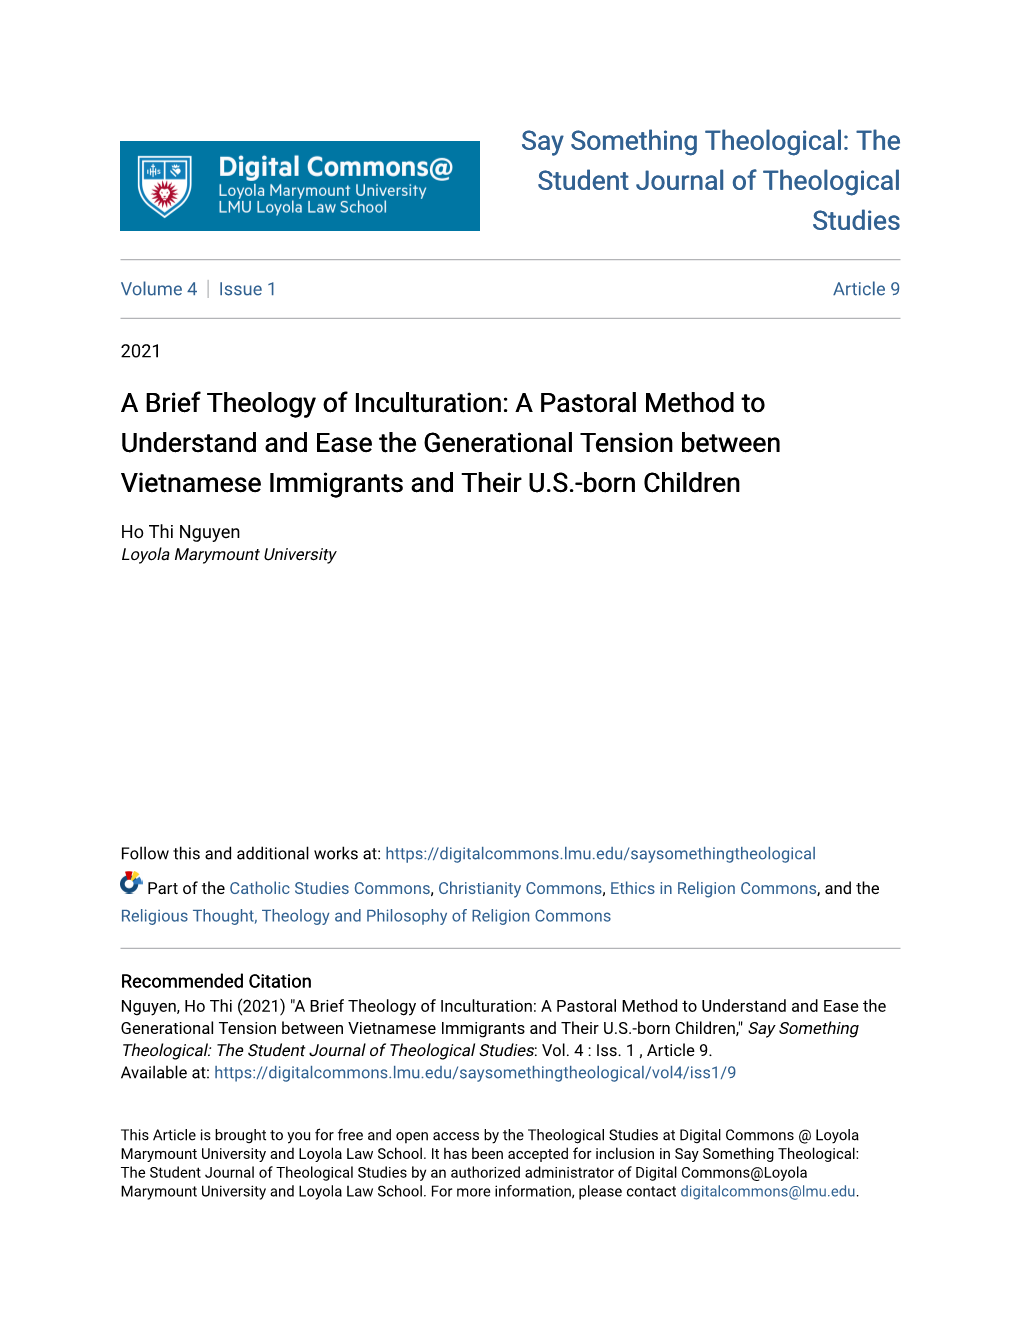 A Brief Theology of Inculturation: a Pastoral Method to Understand and Ease the Generational Tension Between Vietnamese Immigrants and Their U.S.-Born Children